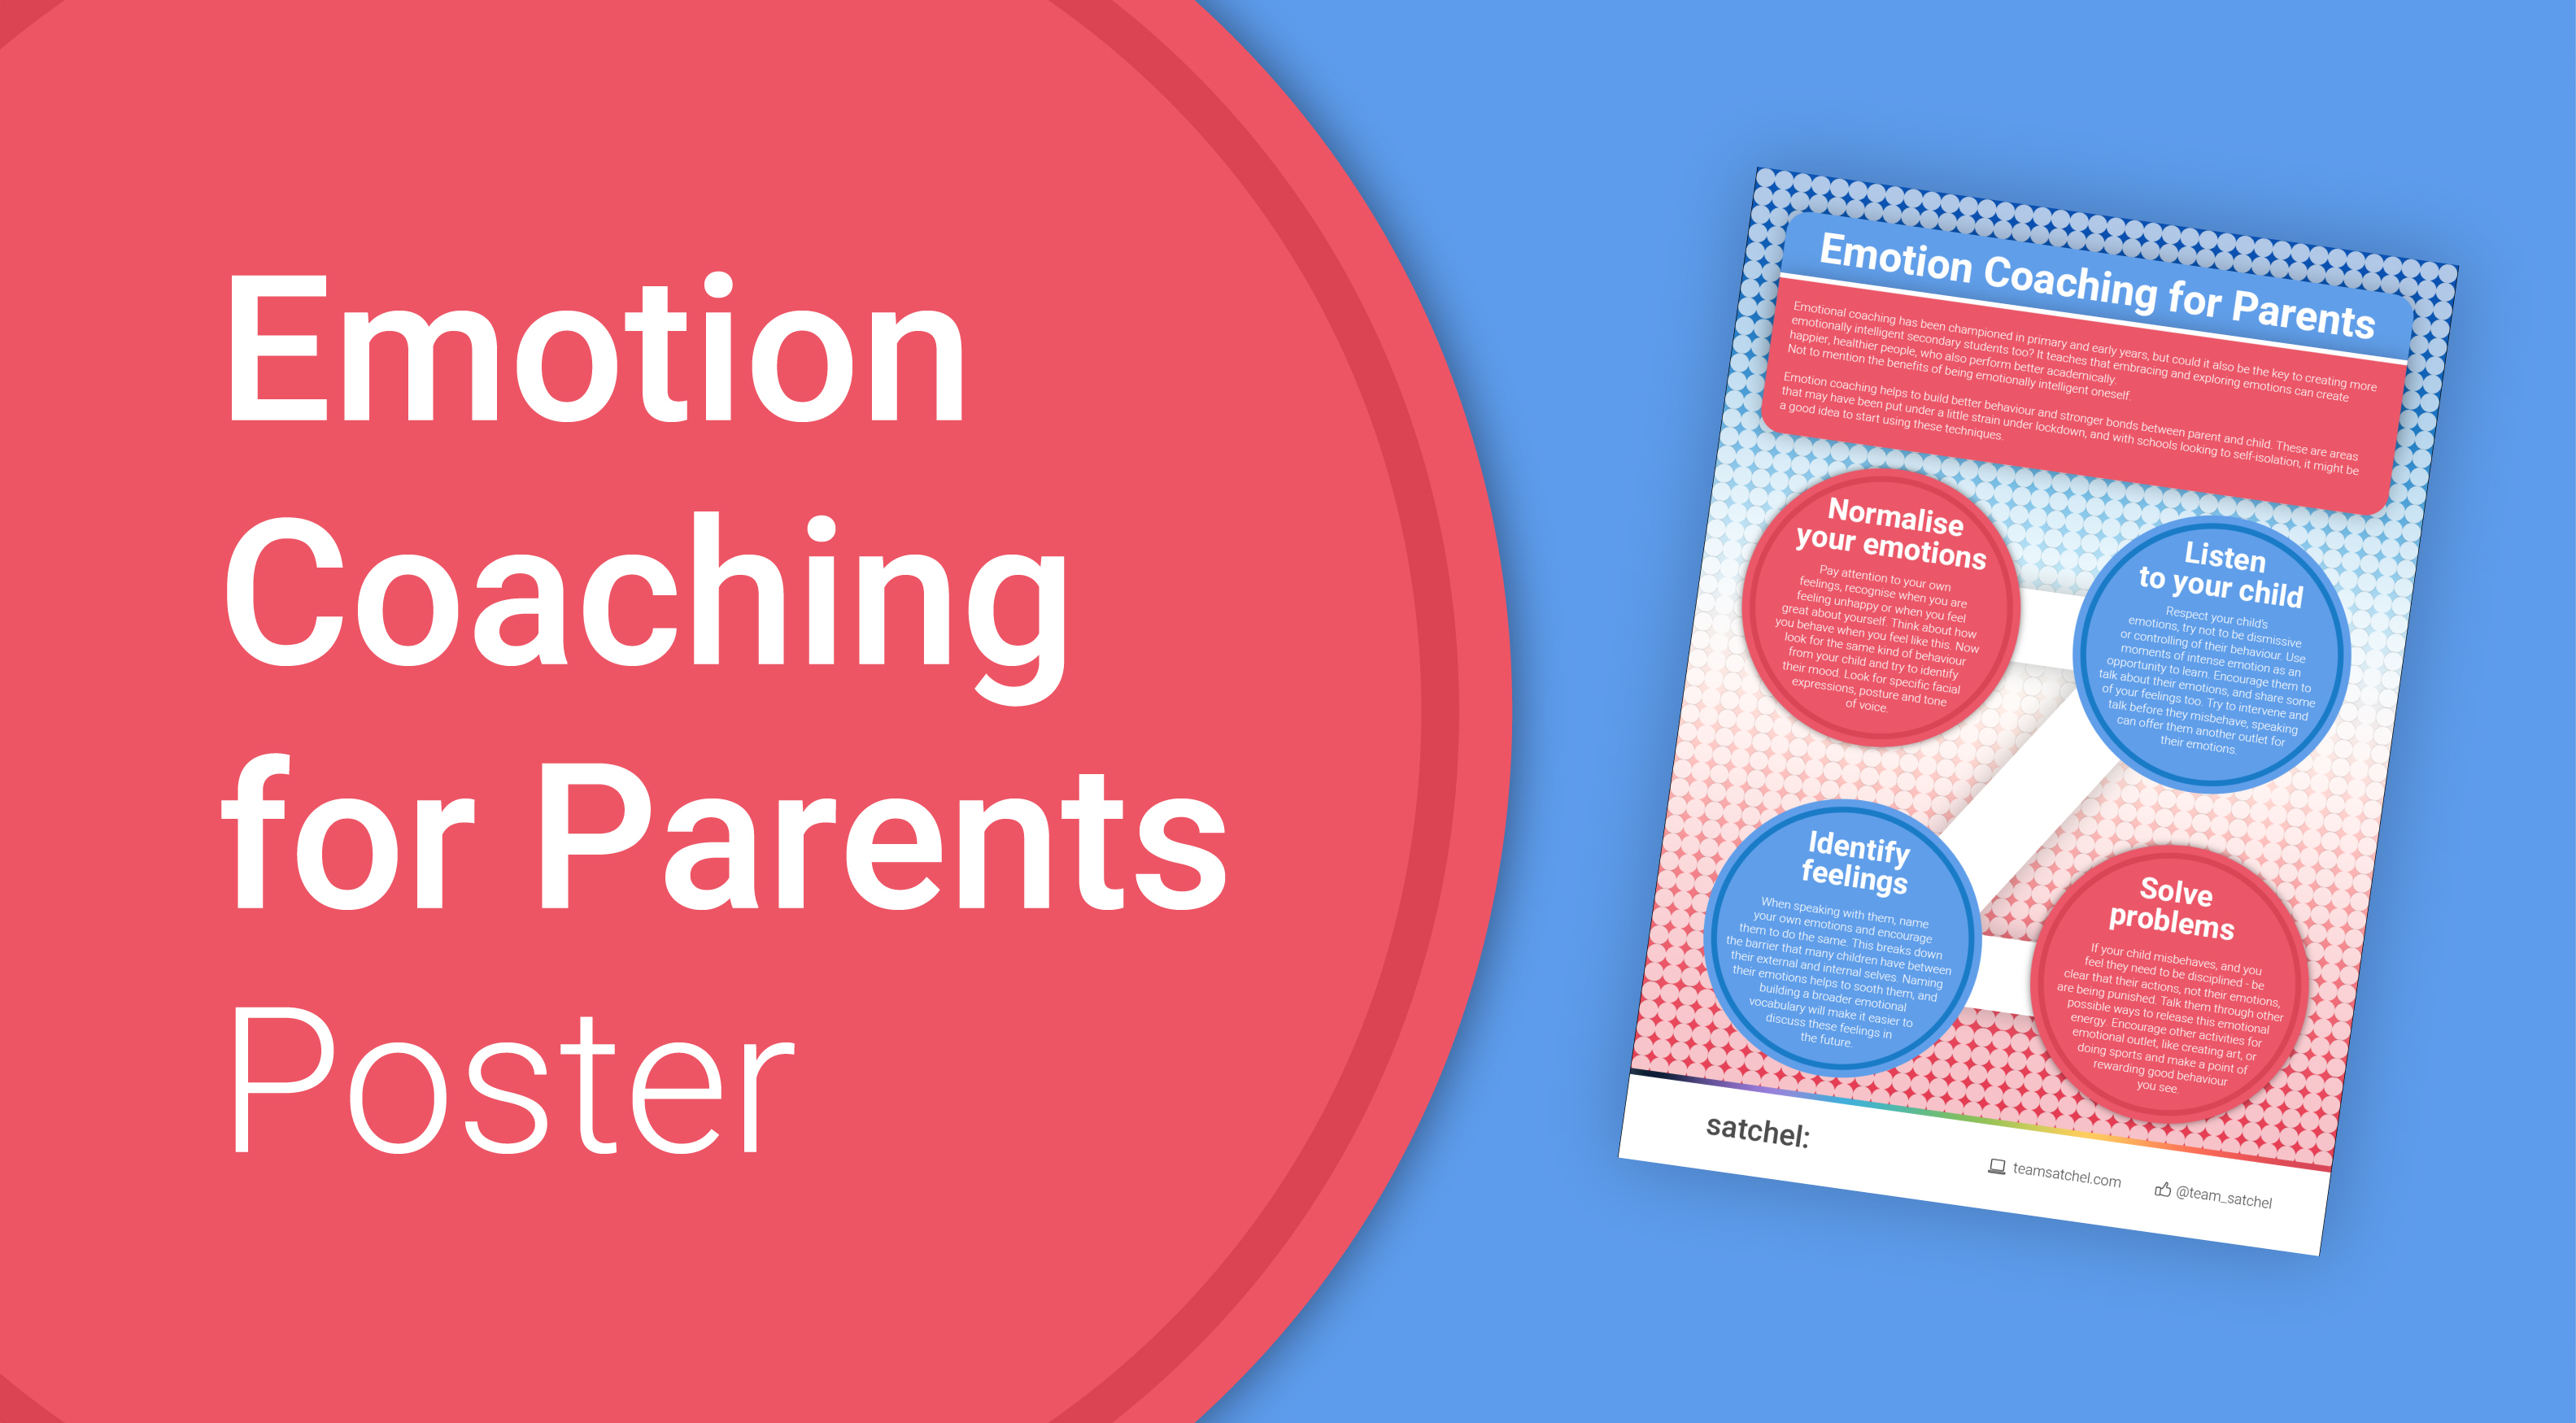 Emotion Coaching for Parents